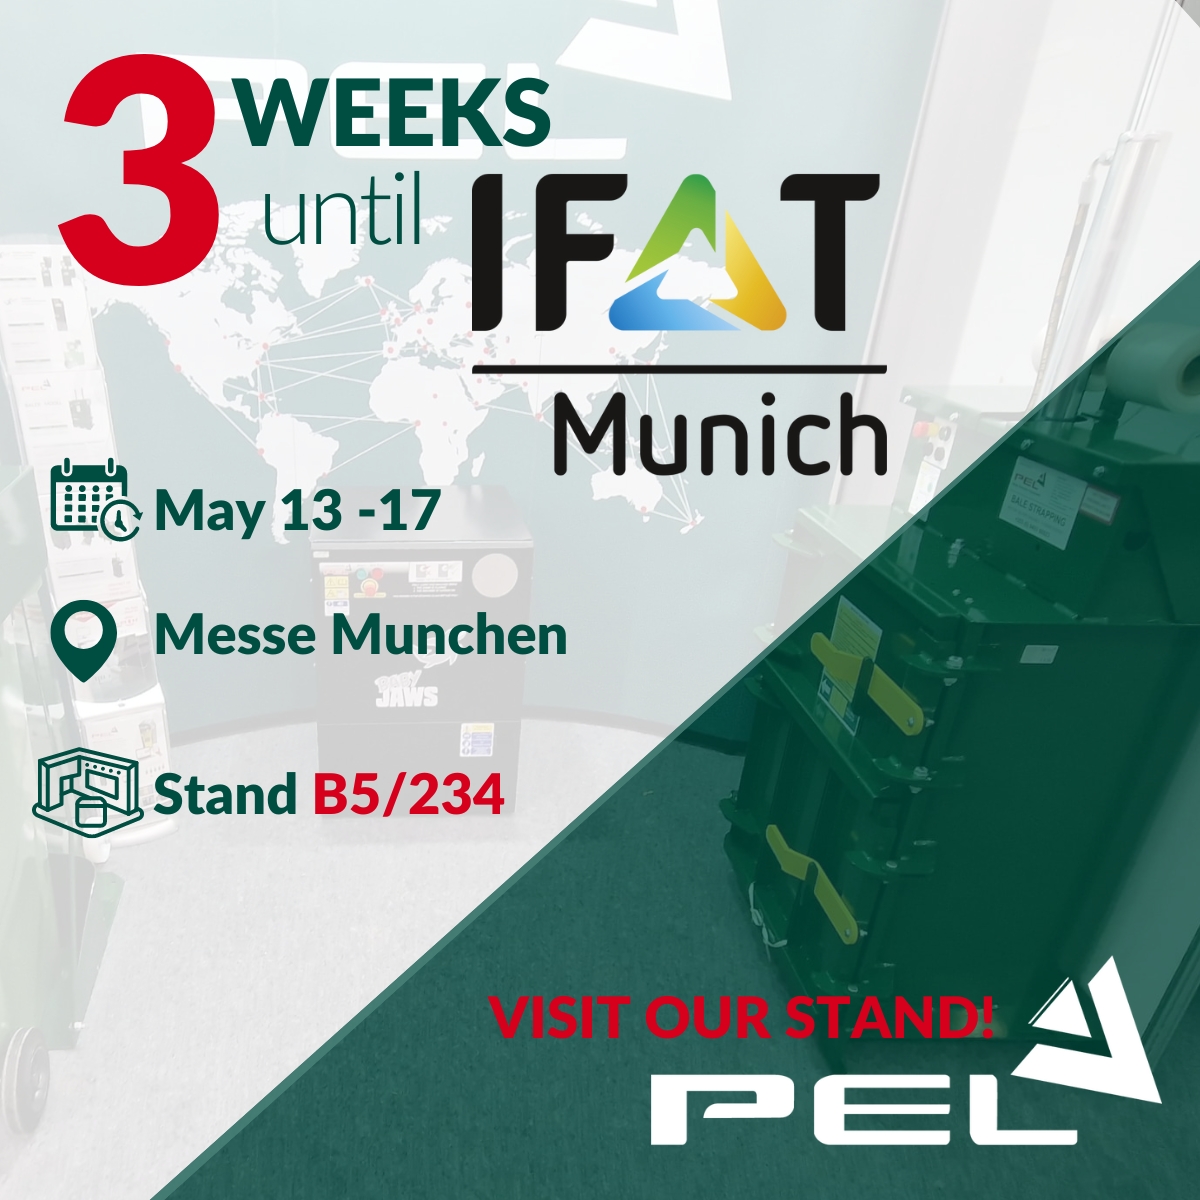 The countdown is on! 🎊

Only 3 weeks until we return to IFAT Munich 🌍 🌱

You can find us at stand B5/234

Visit us to learn more about our waste solutions ♻

#ifat2024 #ifat #wastesolutions #wastereduction #sustainable #sustainbility @IFATworldwide